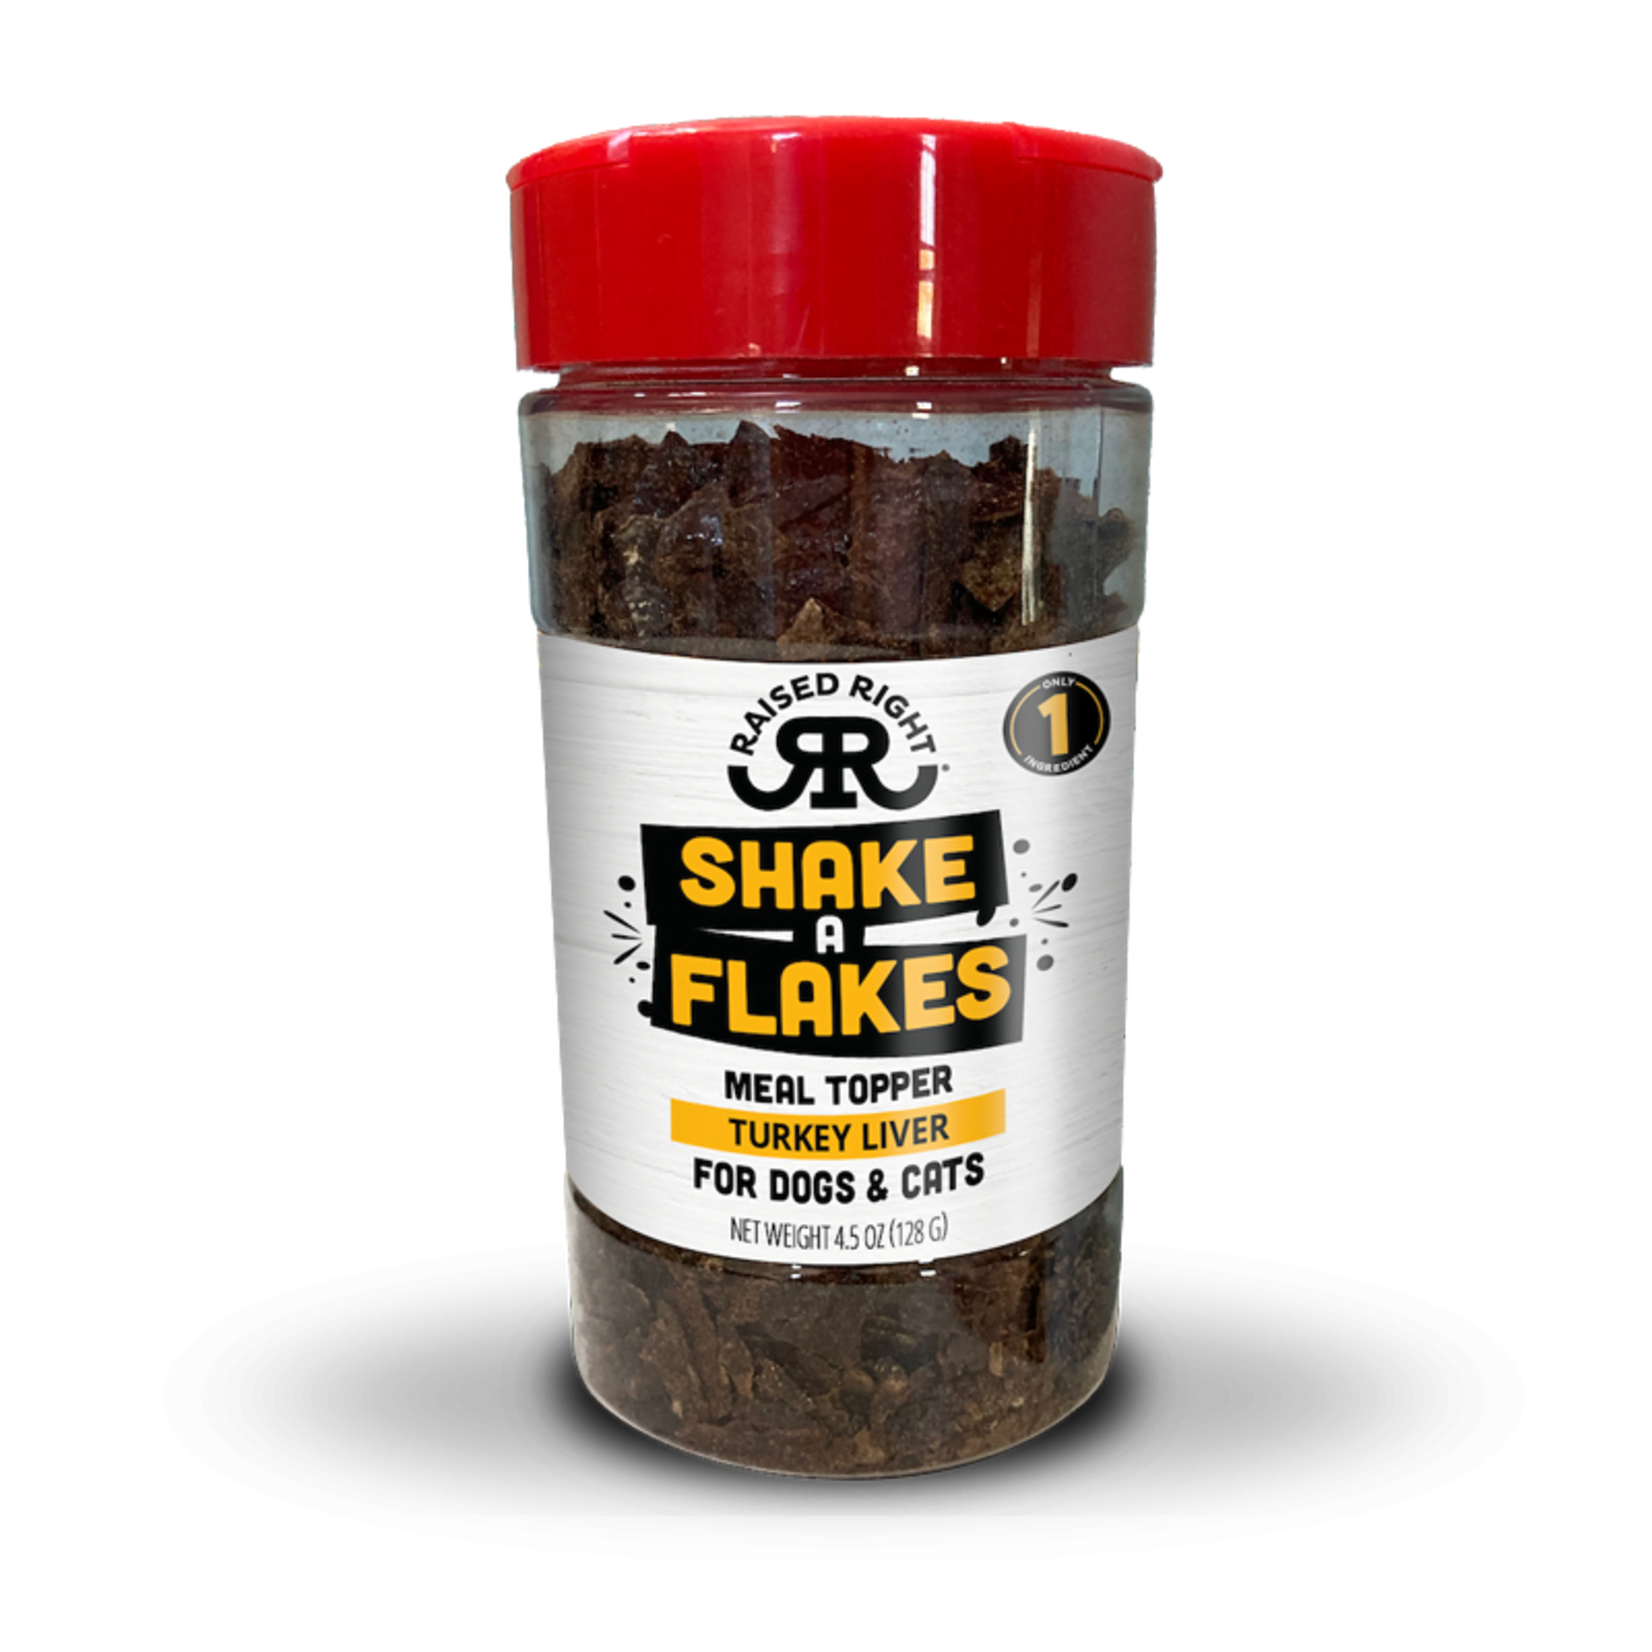 Raised Right Raised Right Shake a Flakes - Turkey Liver Meal Topper for Dogs & Cats